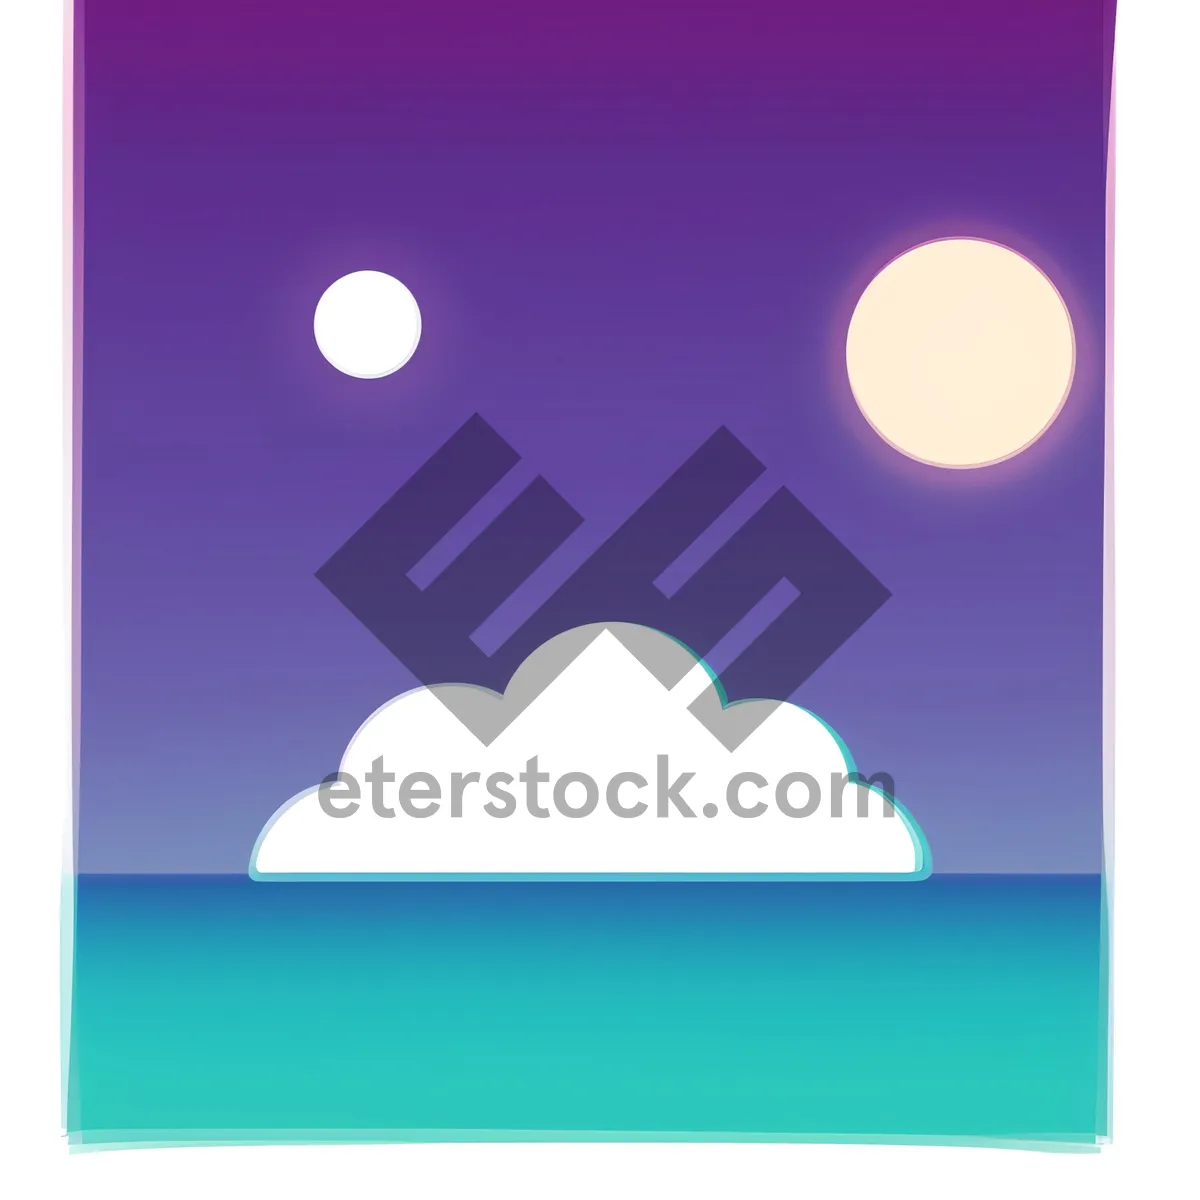 Picture of Shiny Bubble Graphic Icon with Letterhead in Round Circle